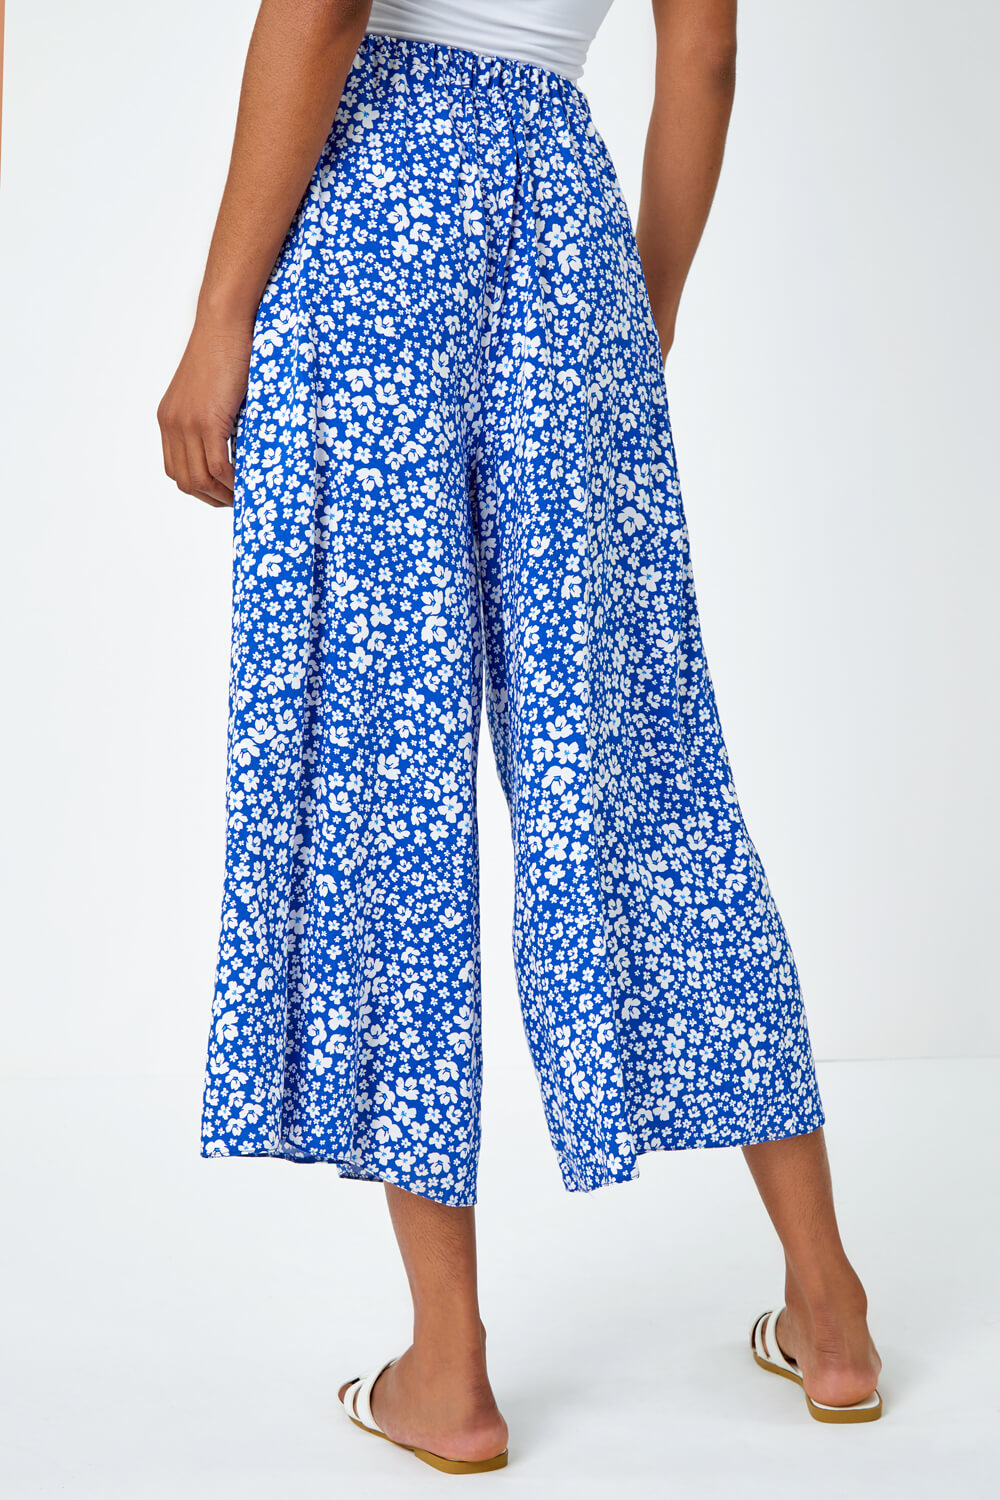 Blue Ditsy Floral Print Culotte Trousers, Image 3 of 5